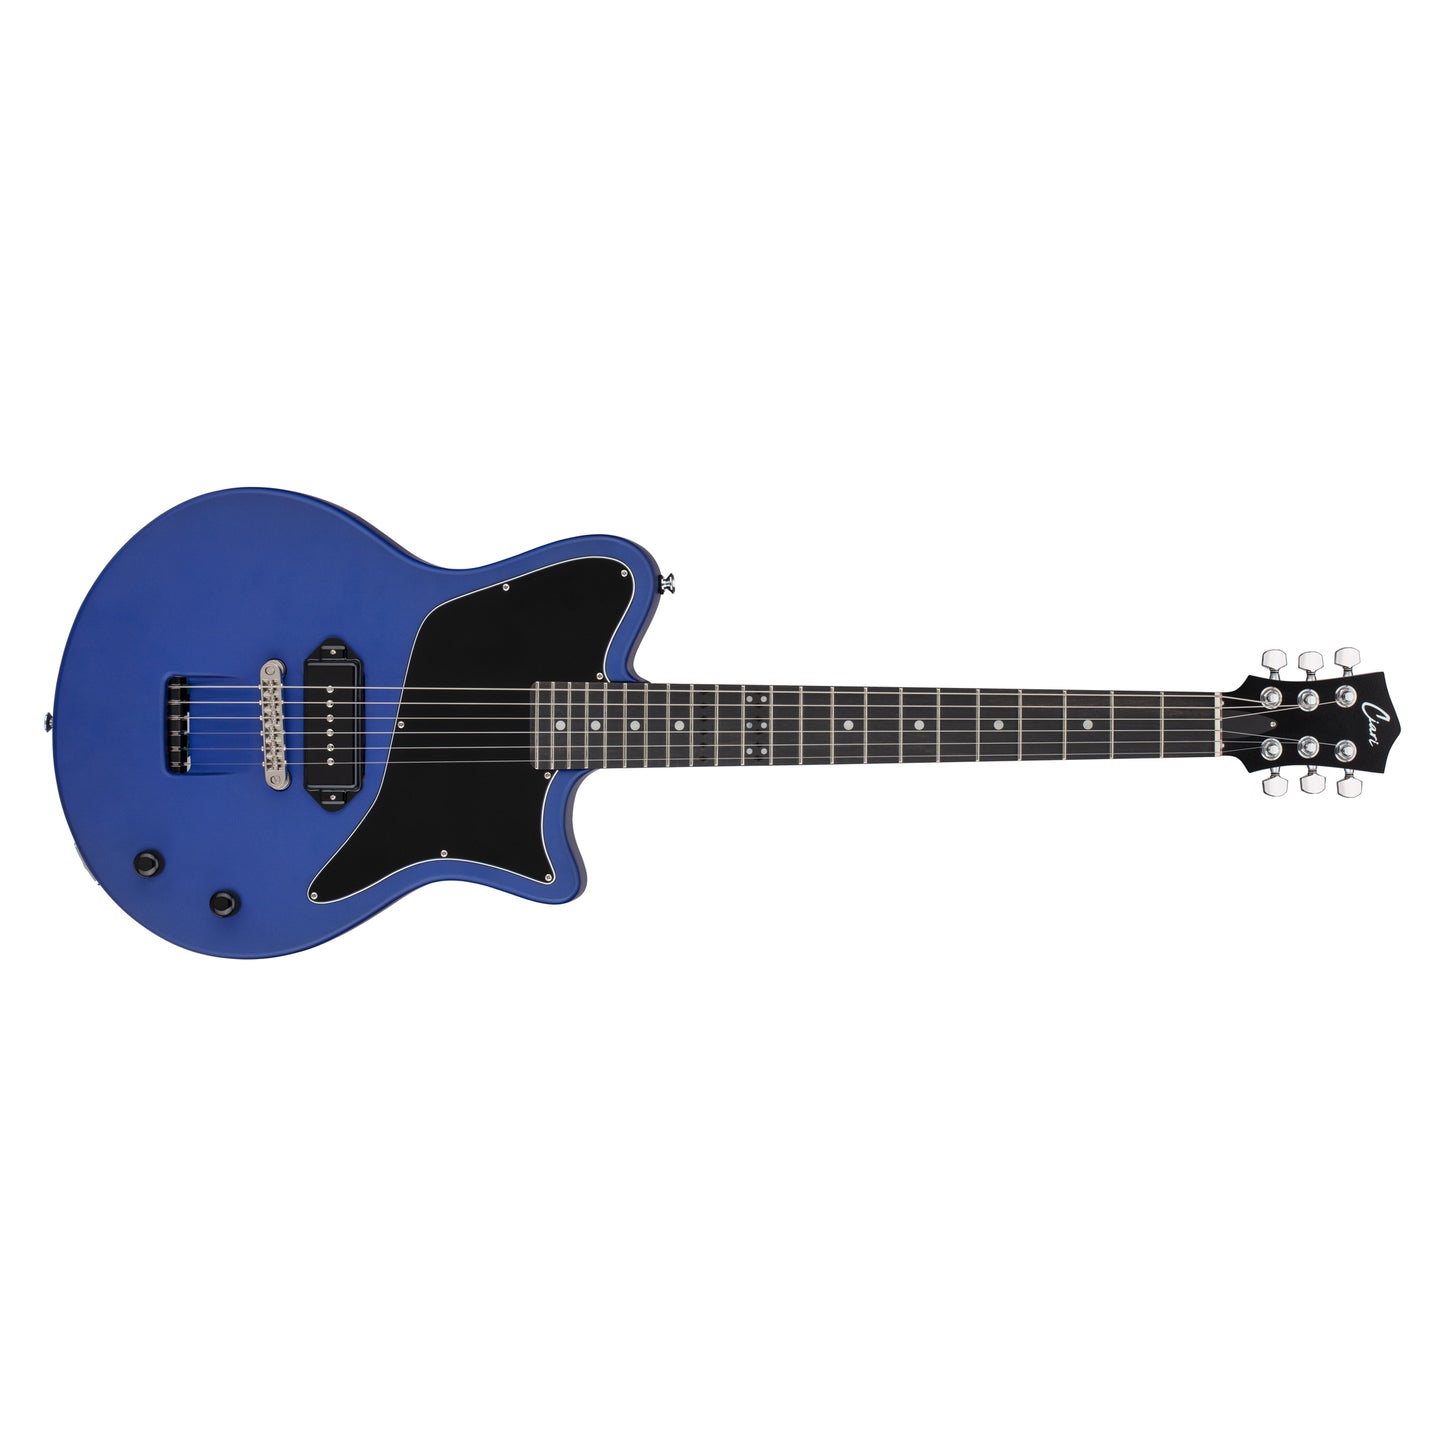 The Ascender™ P90 Solo Electric Guitar in Blue